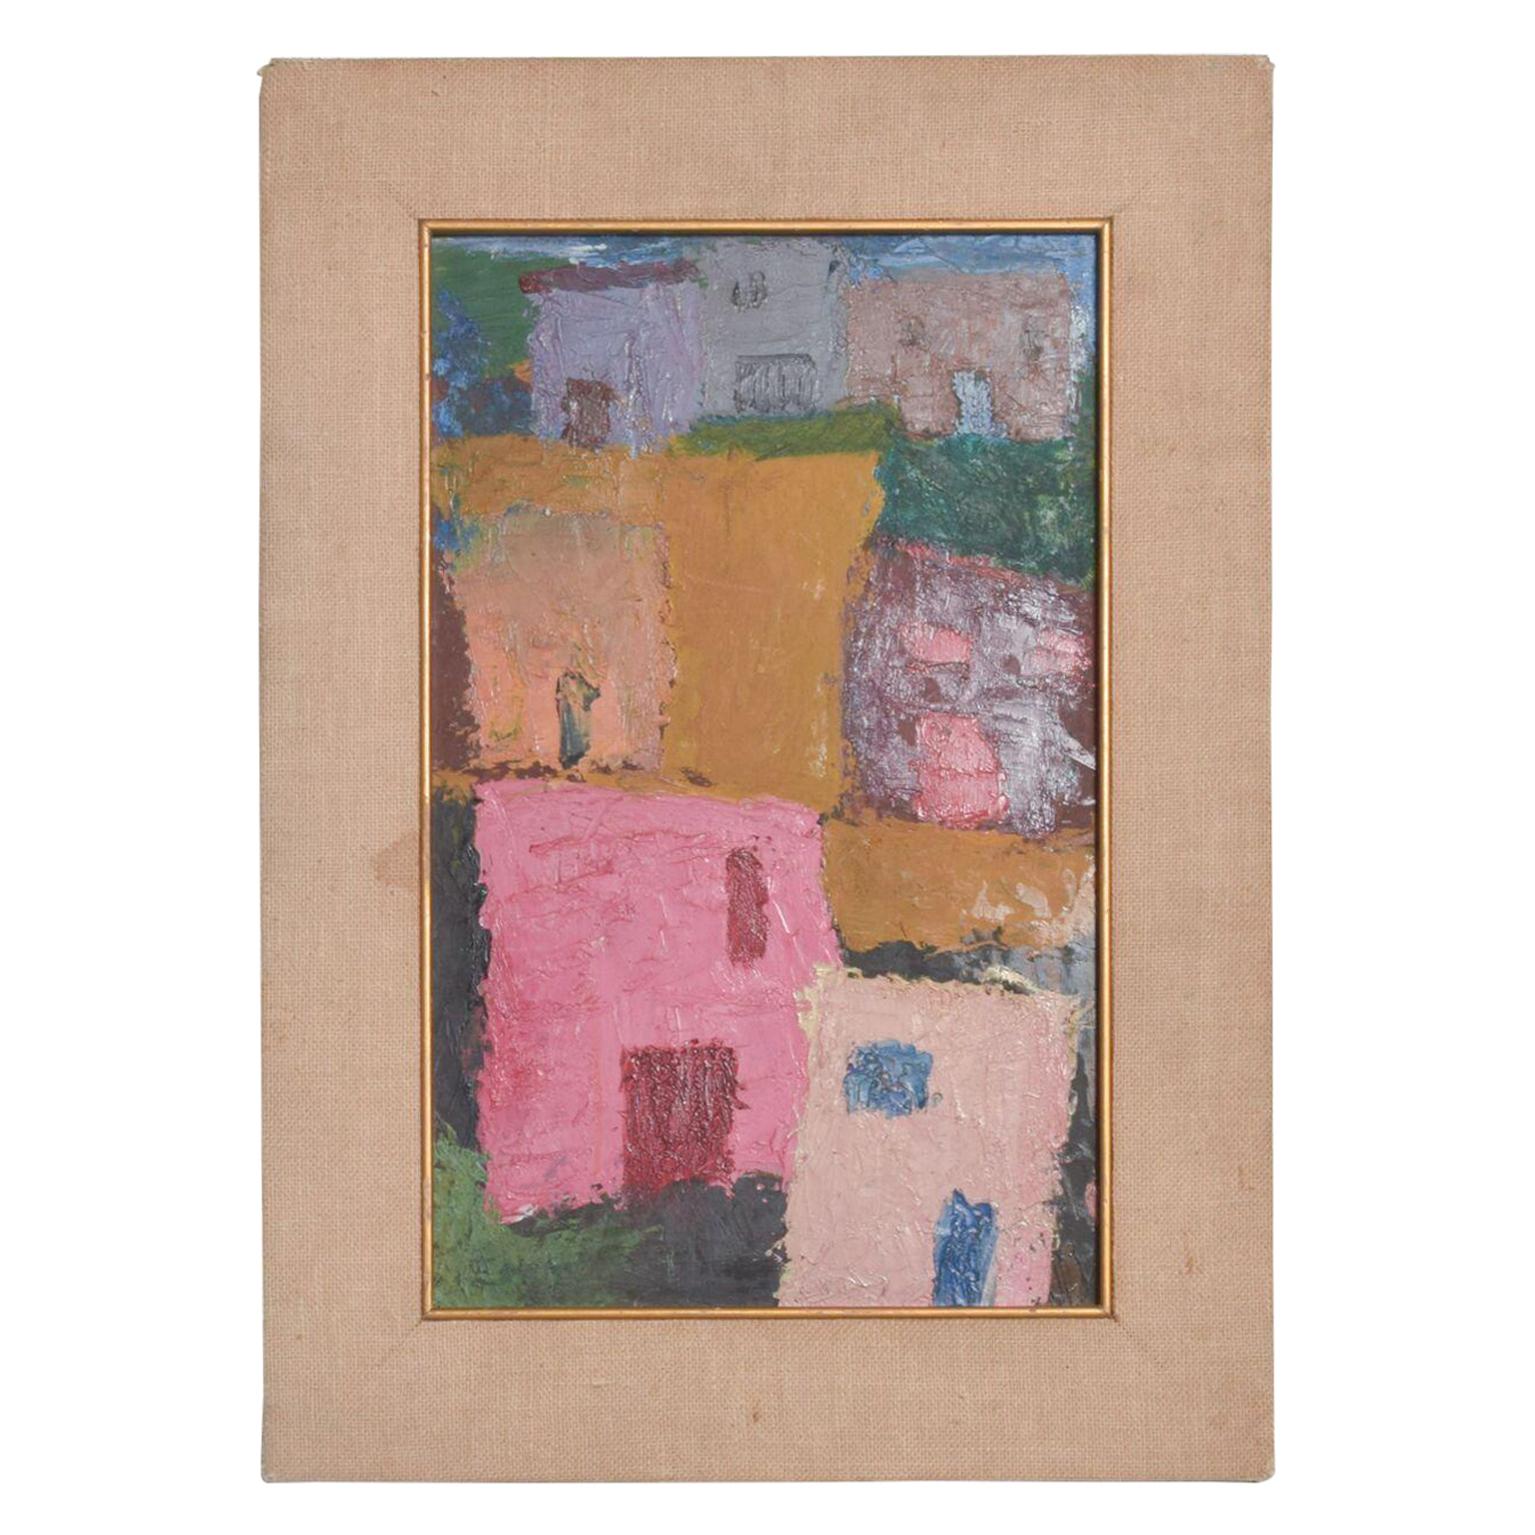 1980s Mexico Modernism in Pink Abstract Art Oil on Canvas Pedro Coronel Style